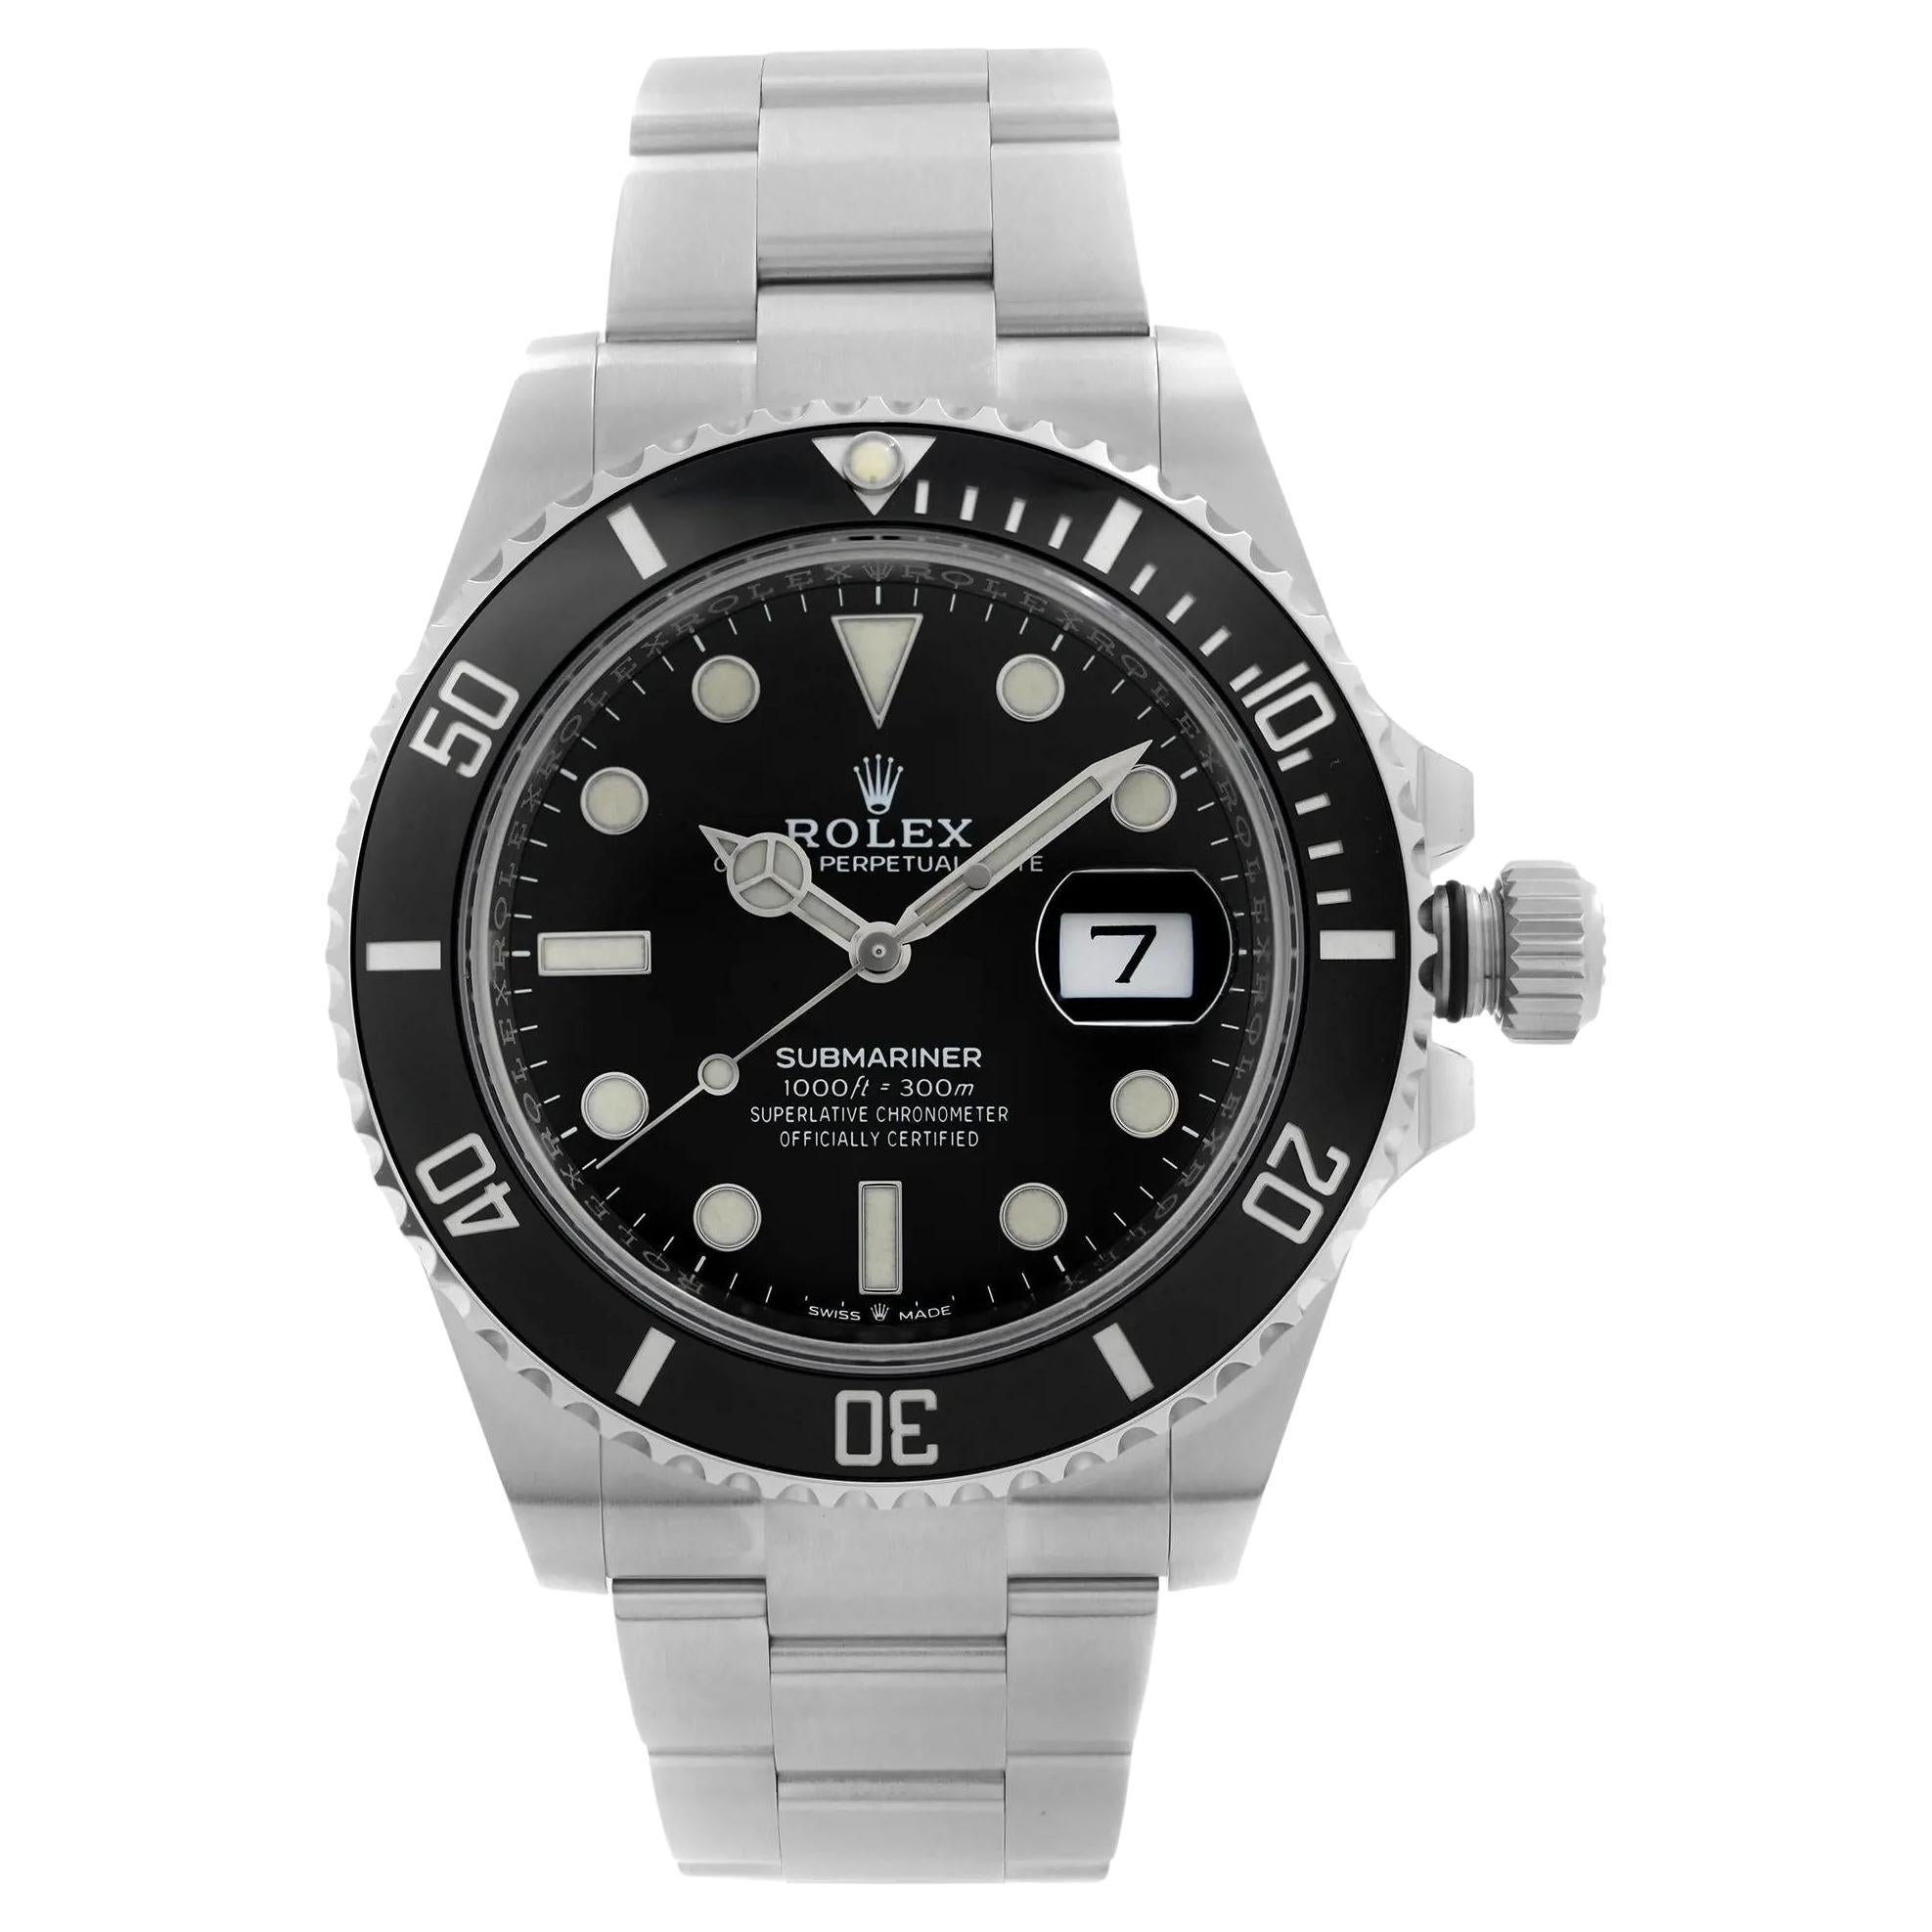 Rolex Submariner Date 41mm Steel Ceramic Black Dial Men Automatic Watch 126610LN For Sale